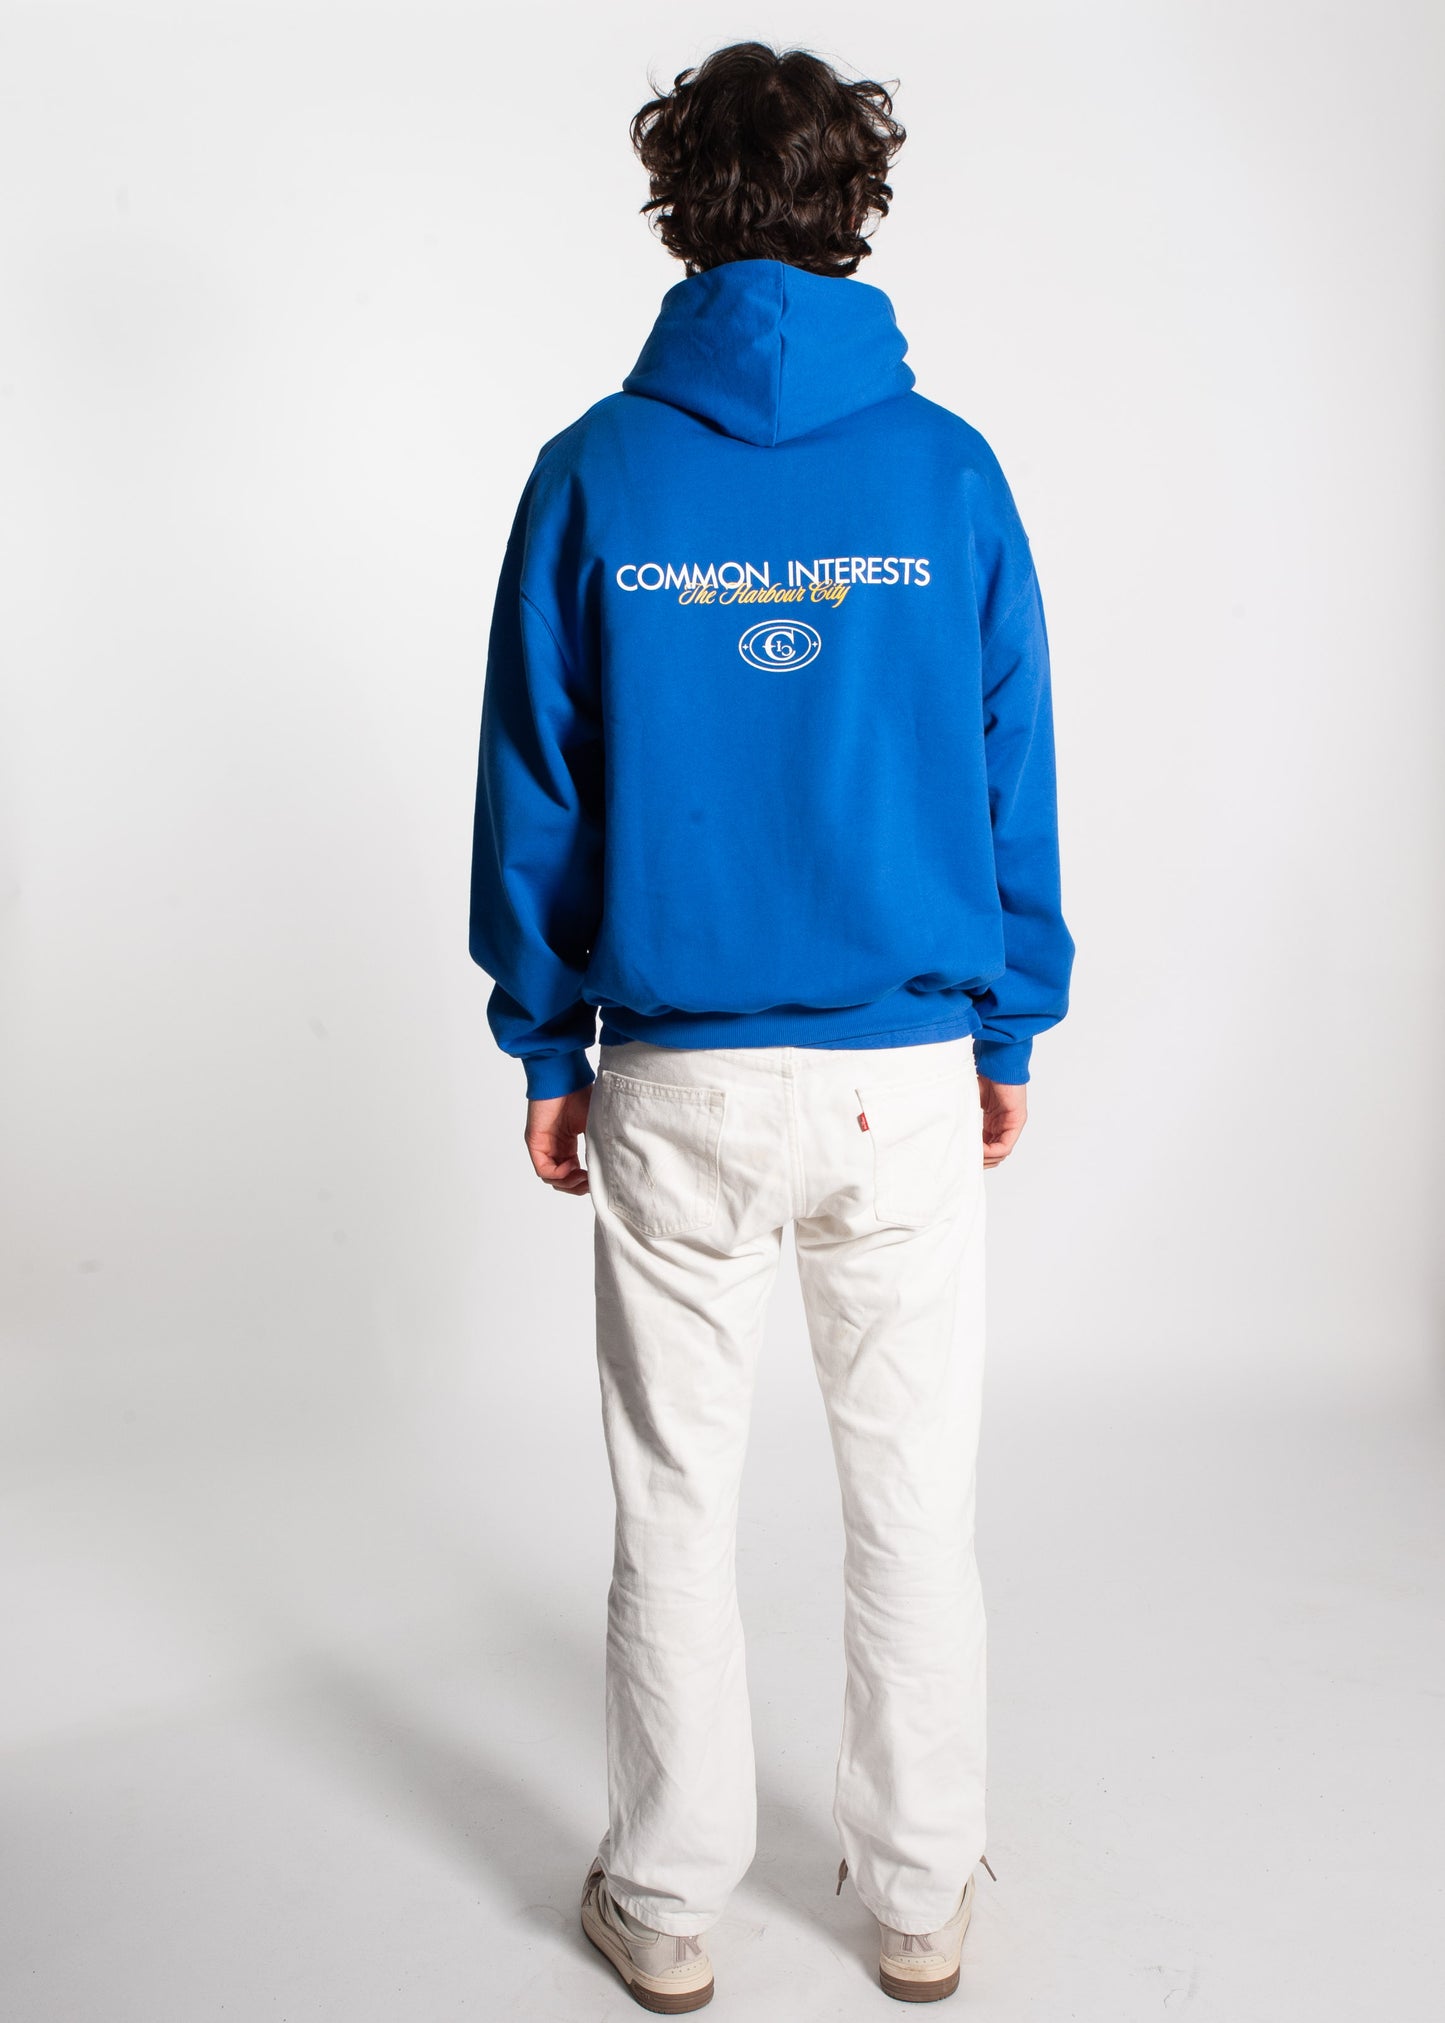 THE HARBOUR CITY HOODIE BLUE